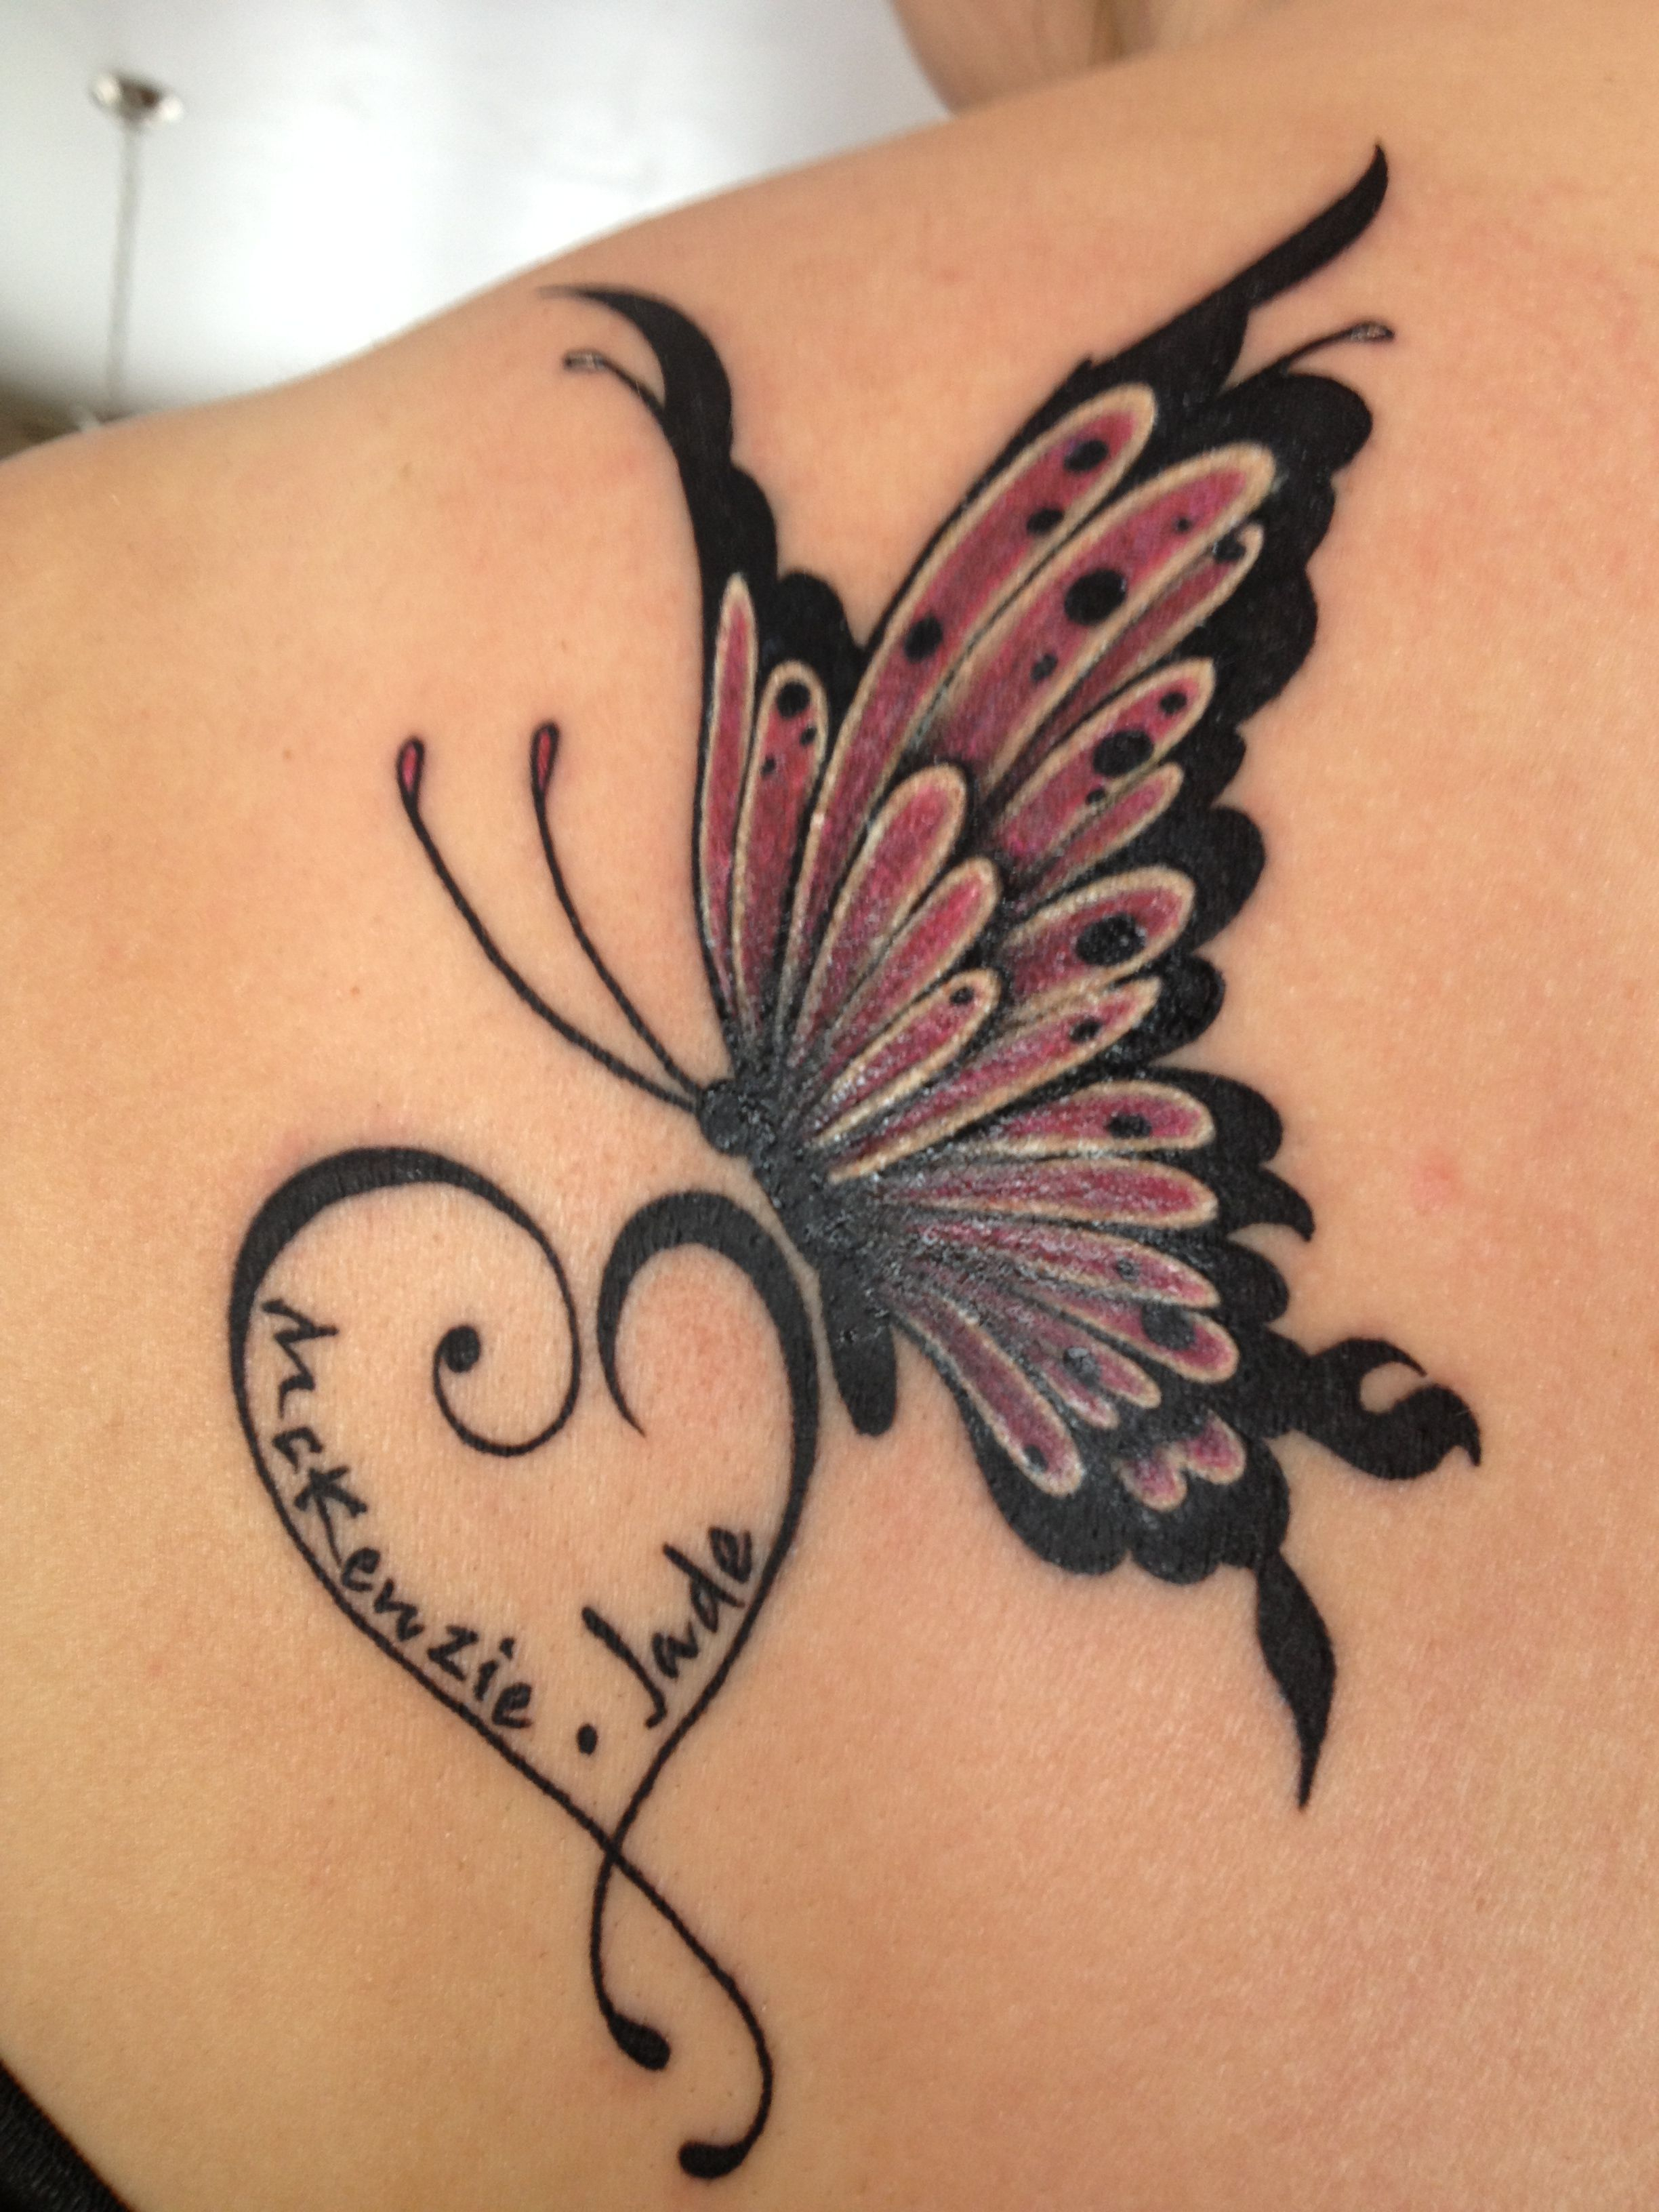 Butterfly Heart Daughters Name Tattoo Tattoo Likes Tattoos with size 2448.....